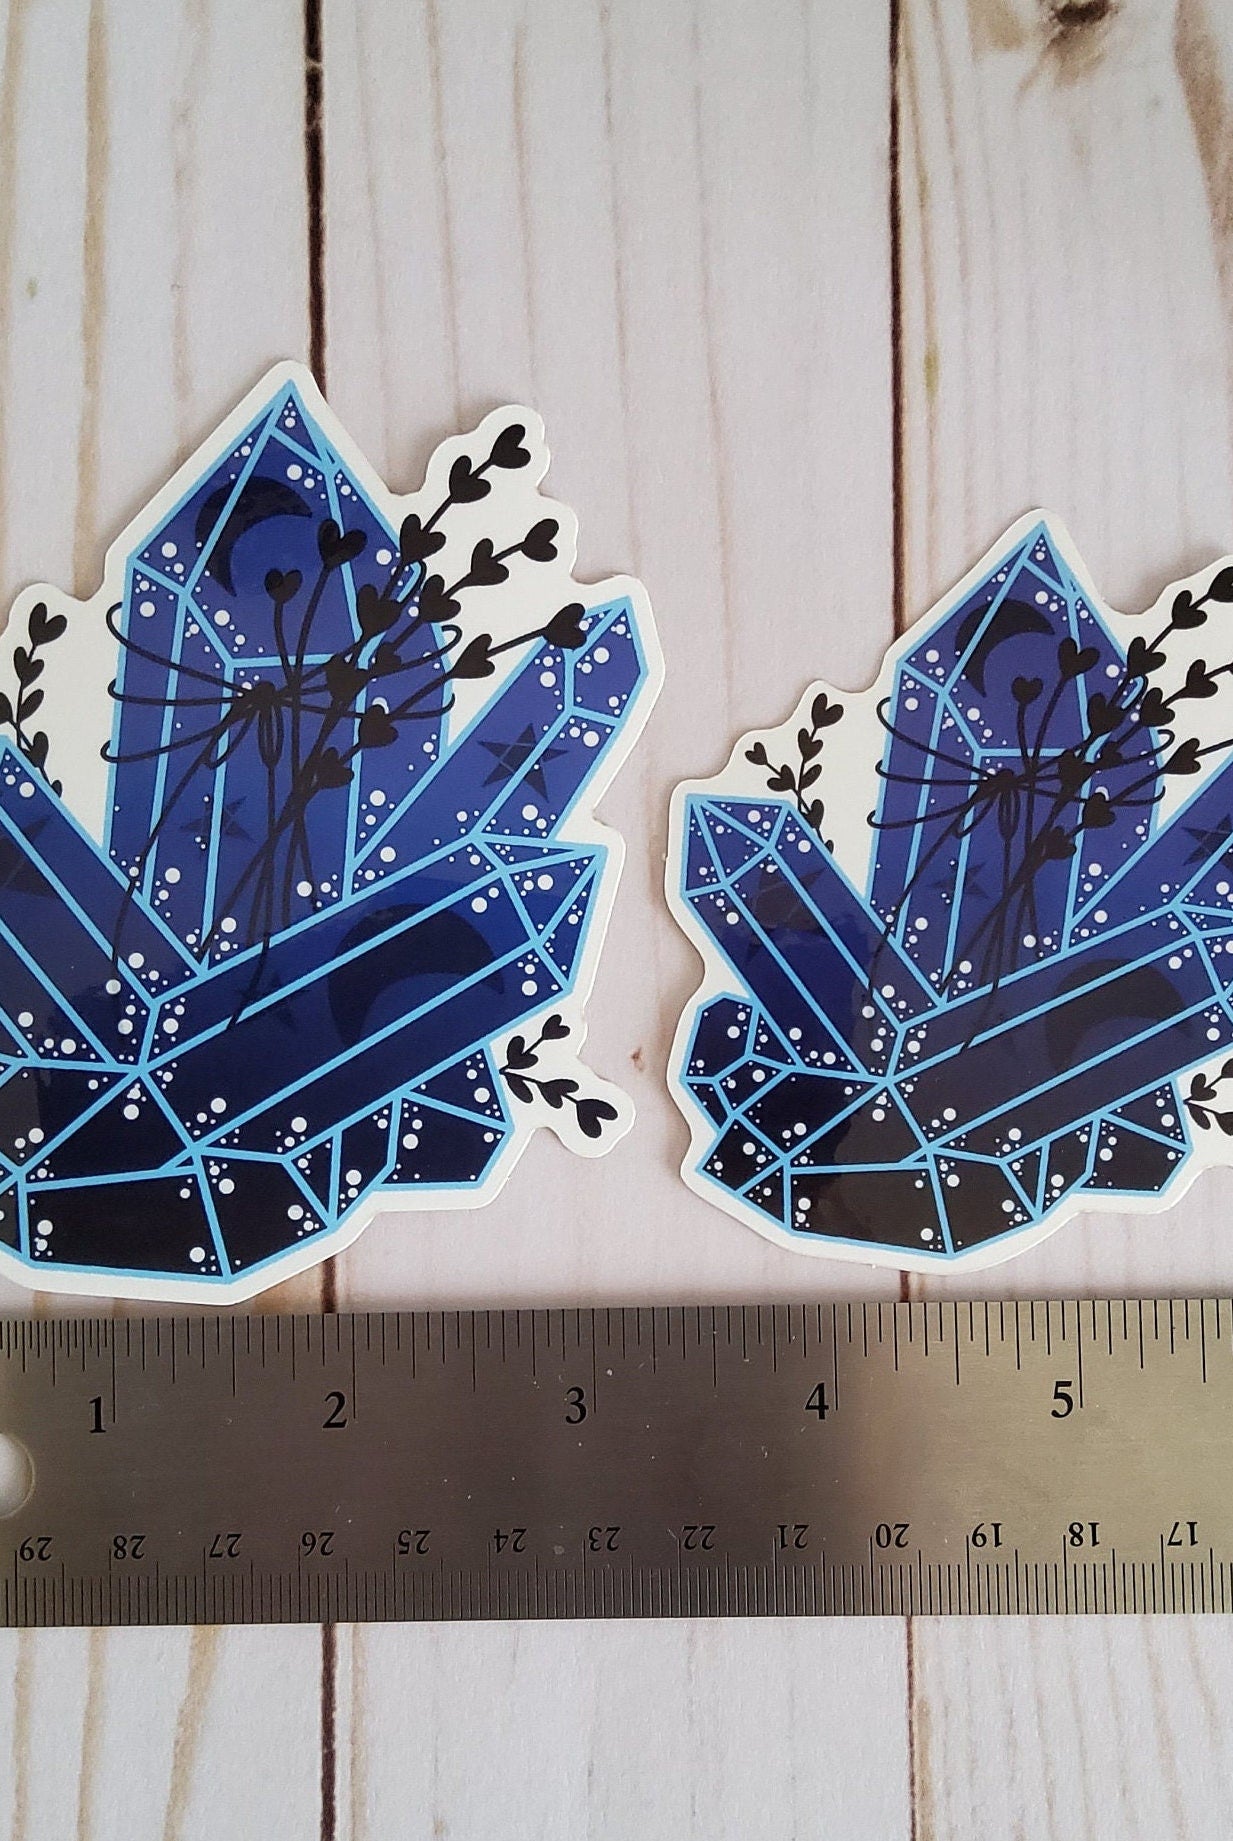 GLOSSY STICKER: Blue and Black Crystal Moon , Dark Aesthetic Crystal Sticker , Crystal Sticker , Blue Crystal Sticker , Crystal Stickers